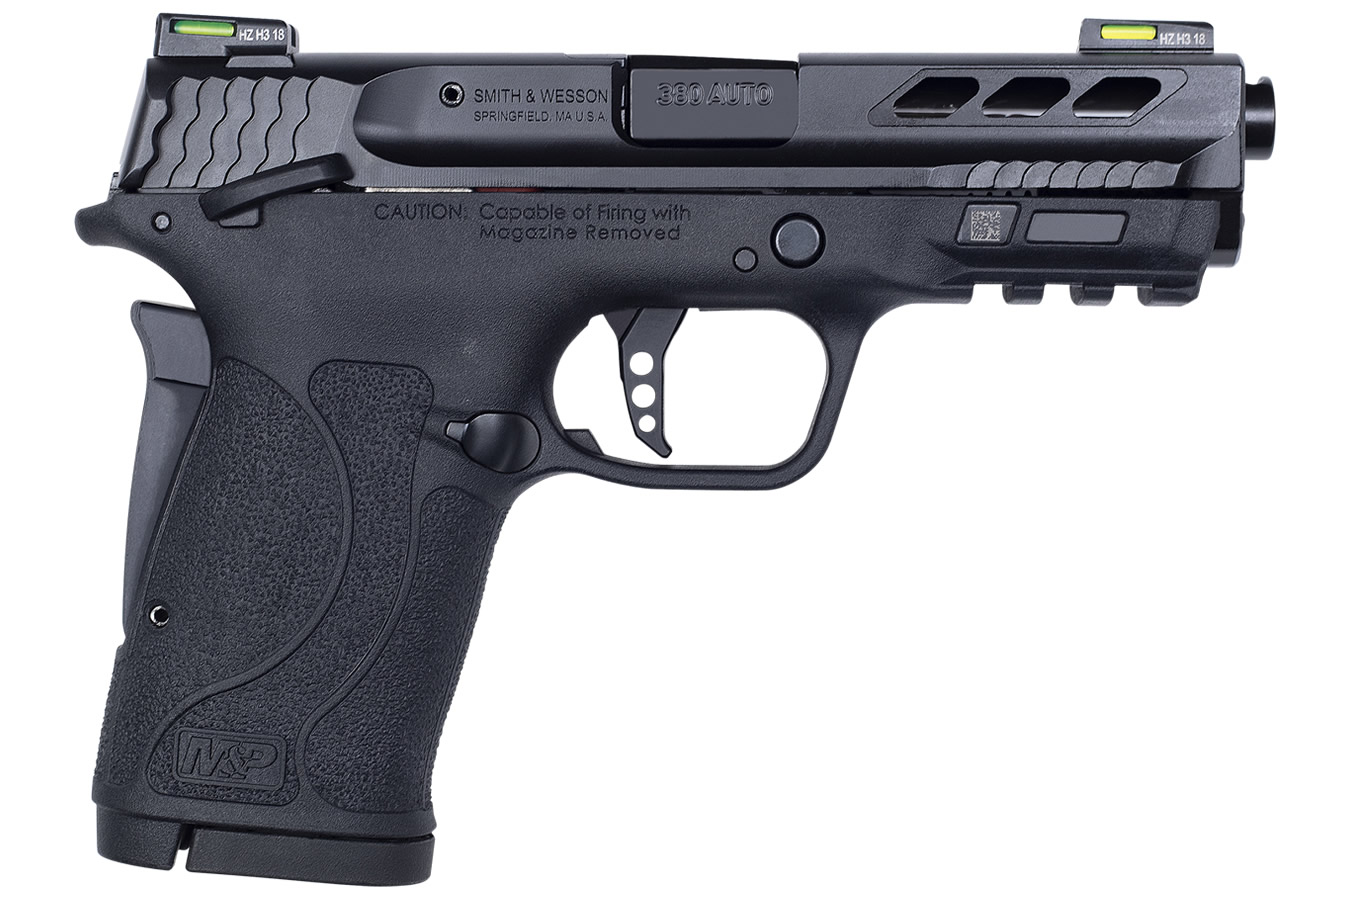 SMITH AND WESSON MP380 SHIELD EZ PERFORMANCE CENTER 380 ACP BLACK